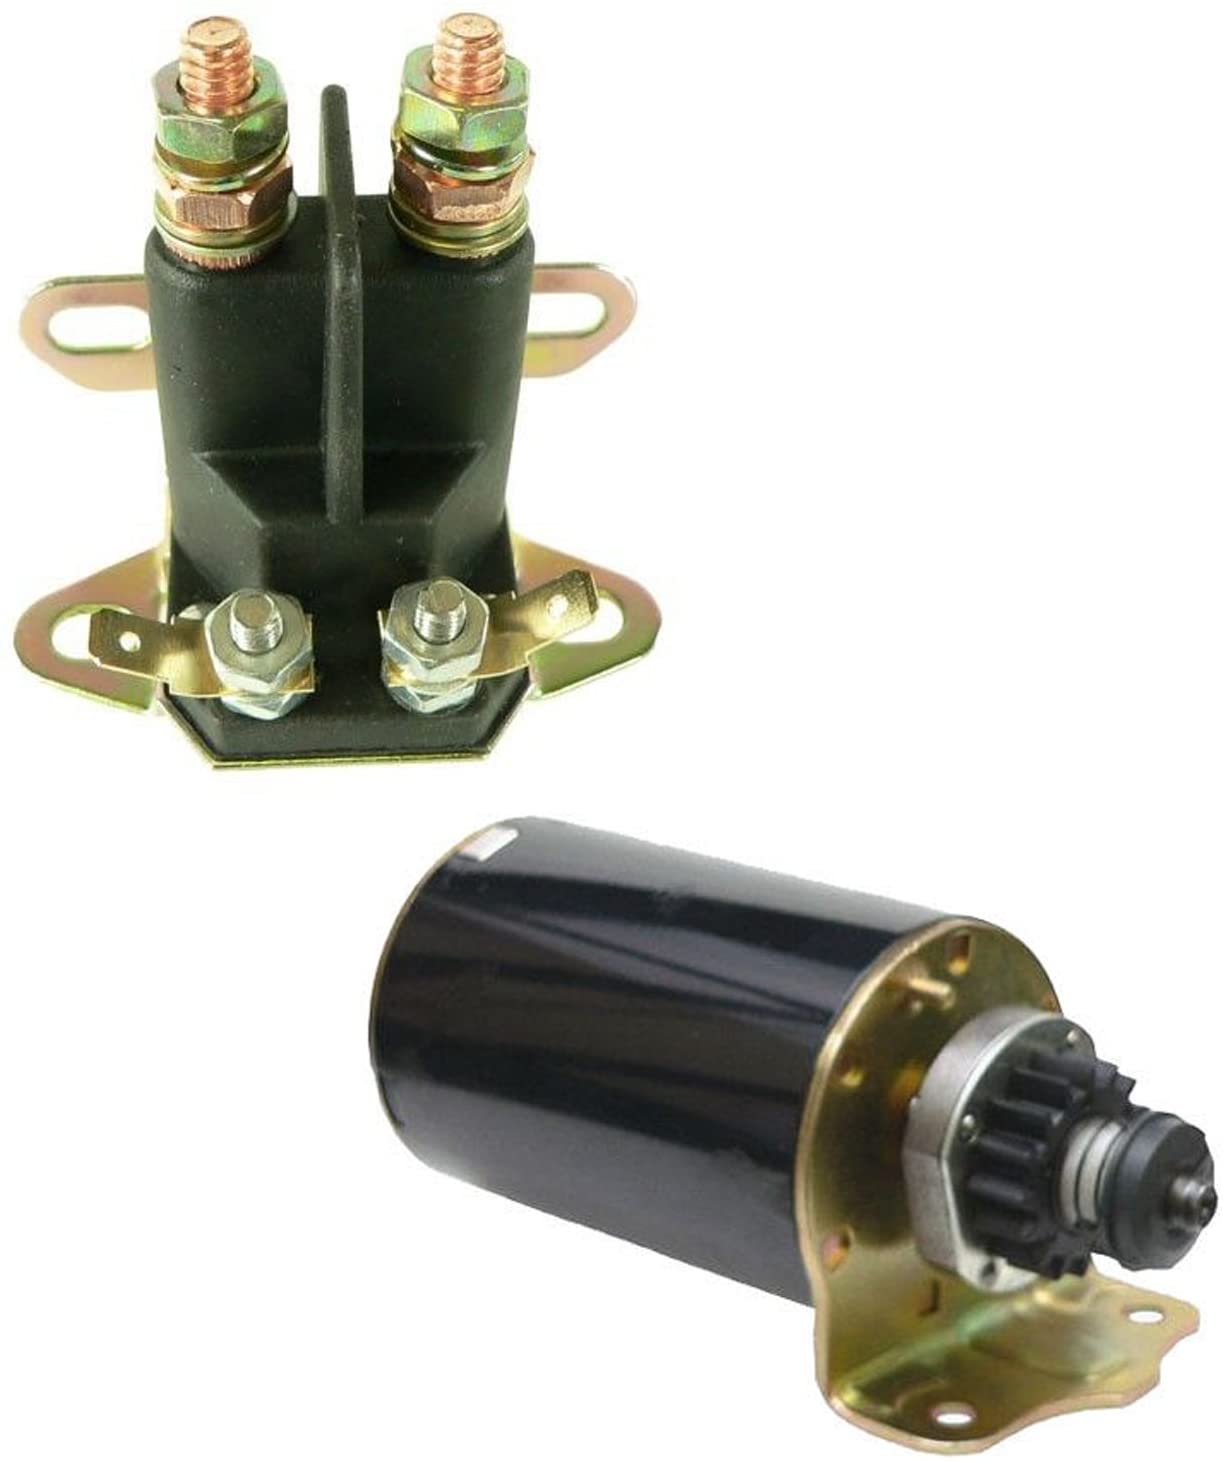 NEW Starter + SOLENOID Replacement For BRIGGS & STRATTON 31C707 31D707 31D777 31E777 31F707